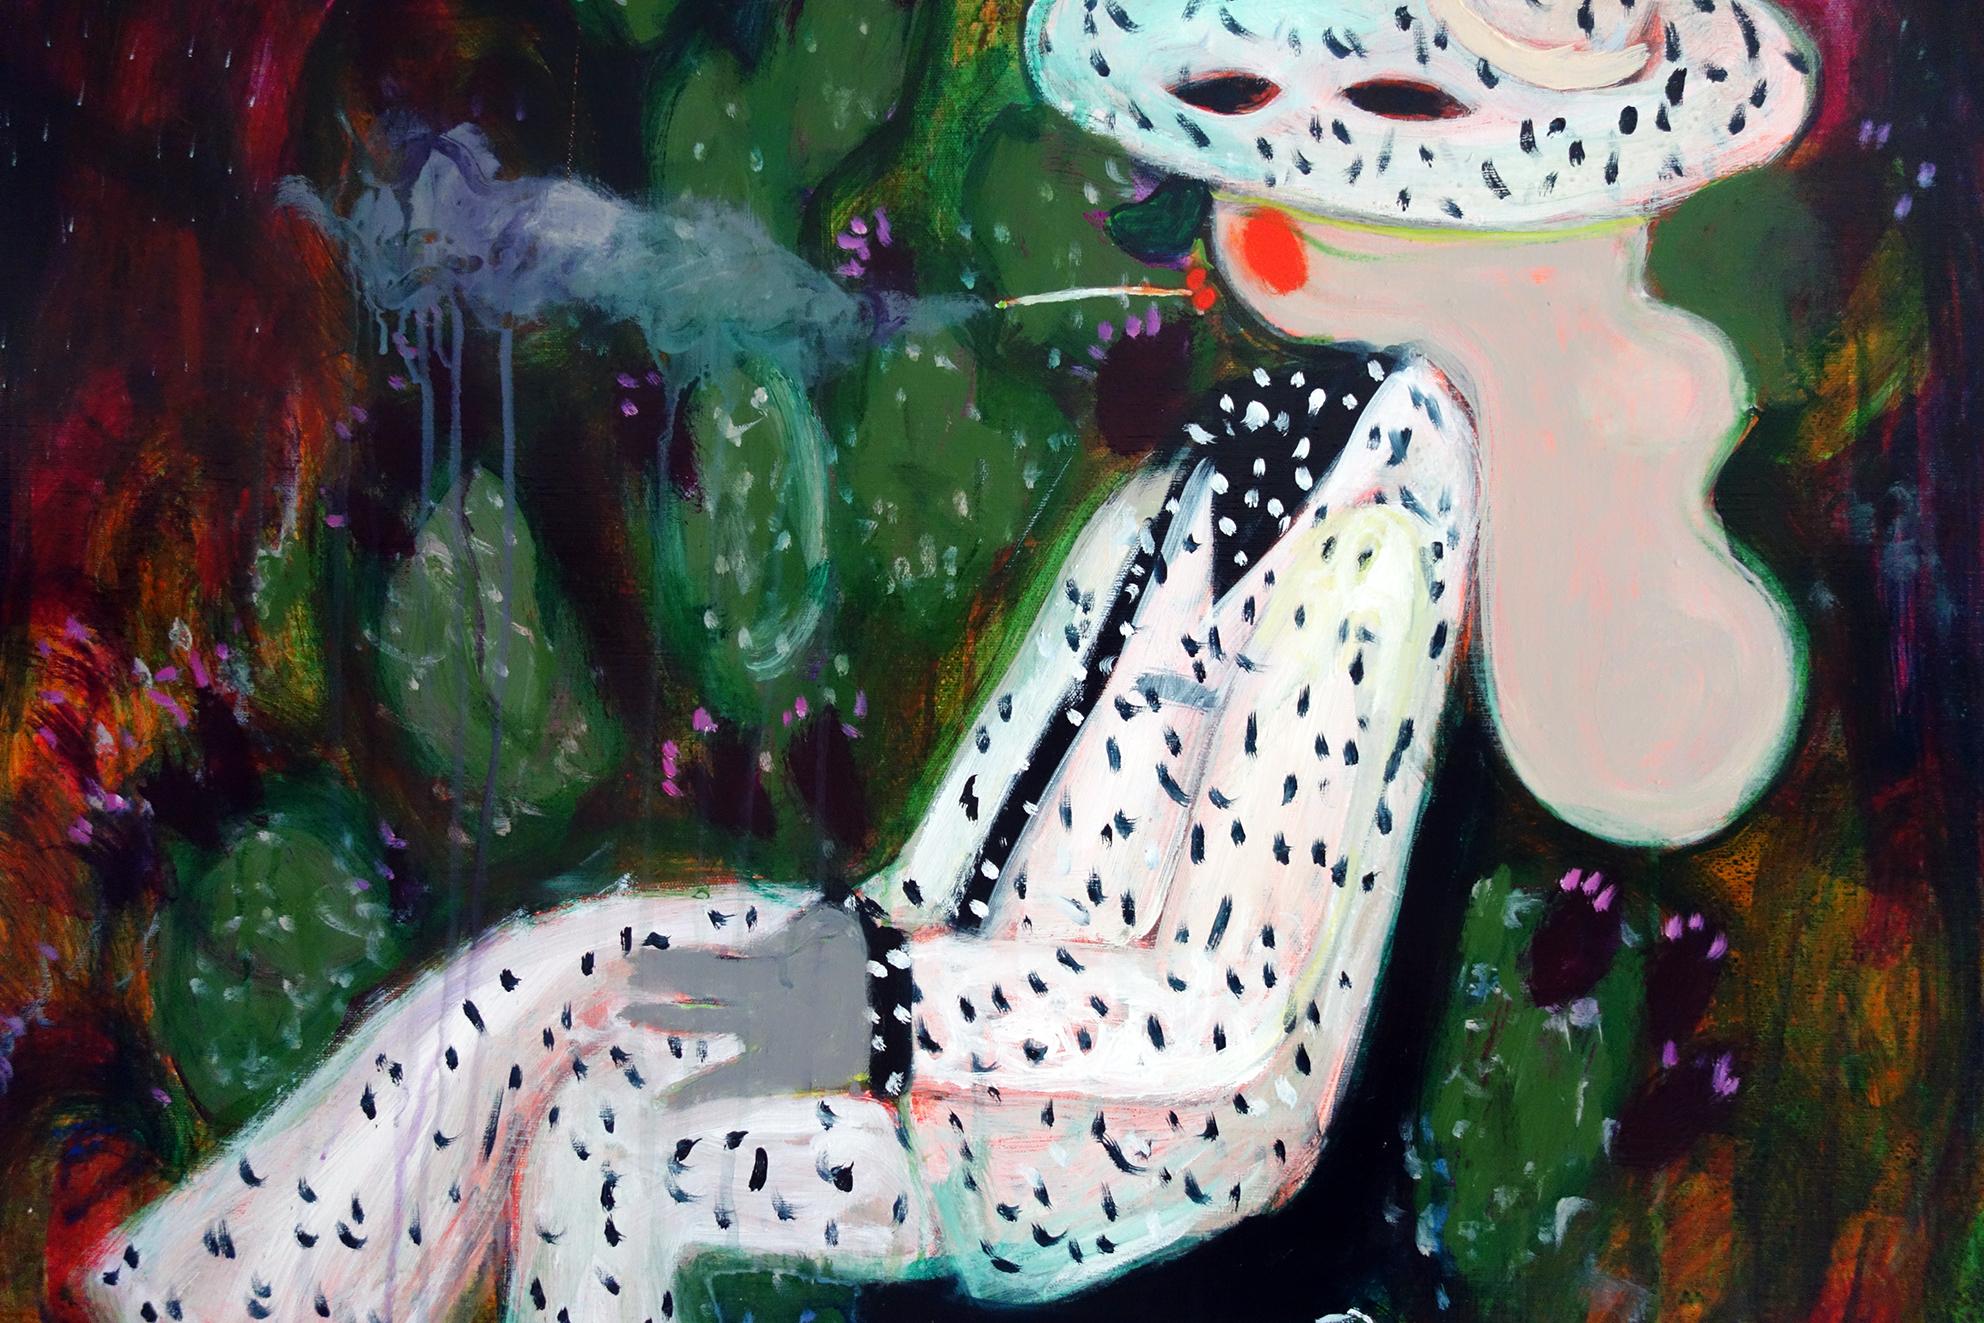 Lady on the background of cacti 2 . Portrait Acrylic Floral Green Polka-dot - Modern Painting by Sergey Bondarev